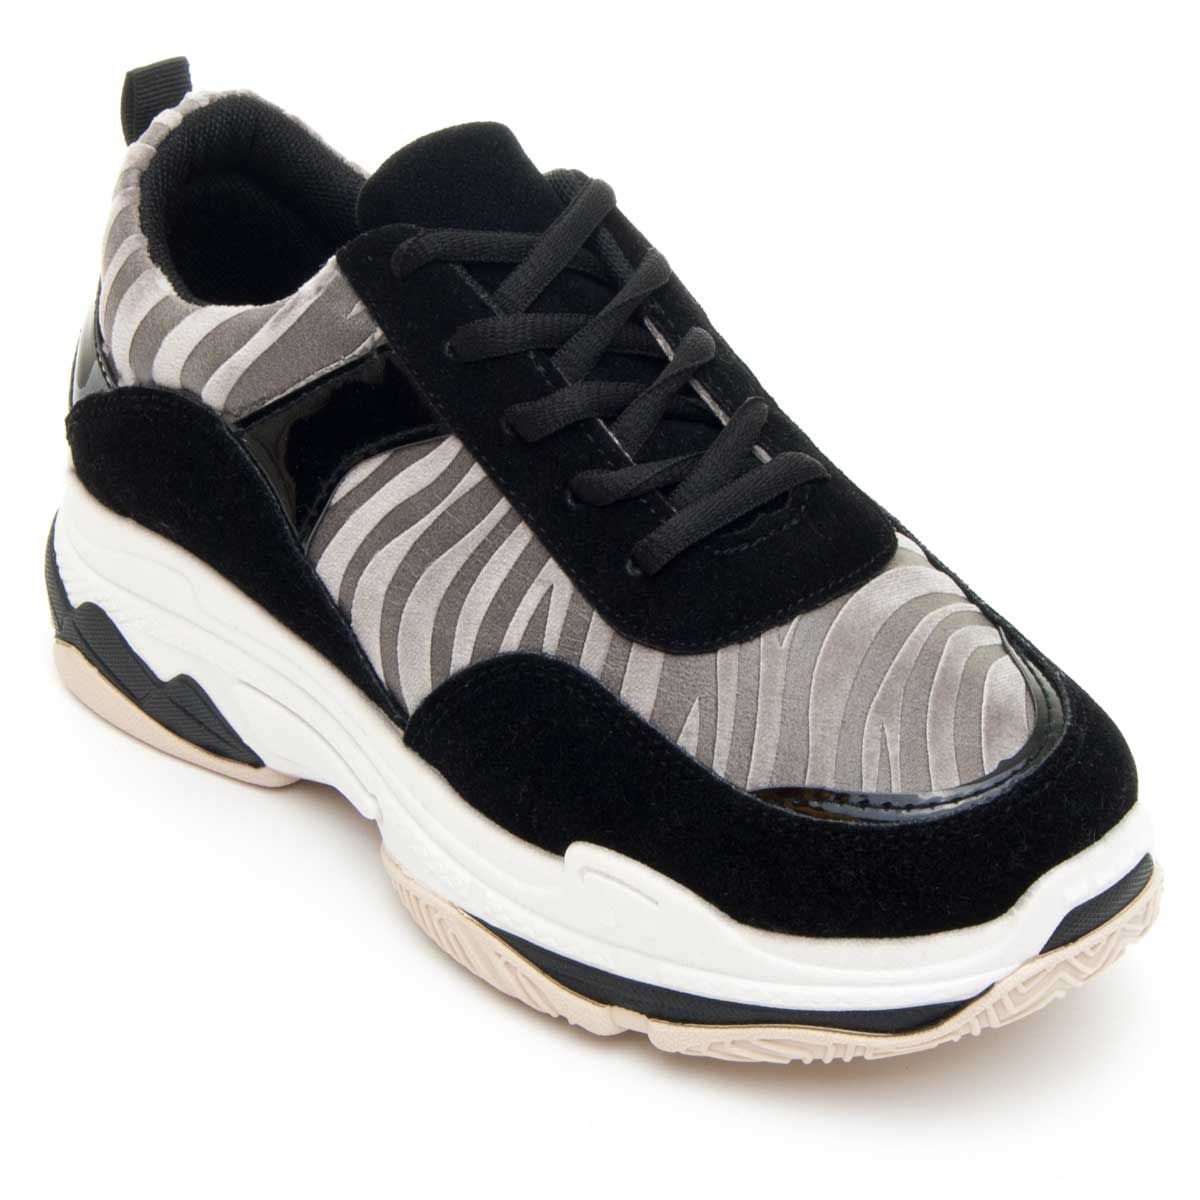 Sneaker of platform trend. It has the padded ankle area, for convenience. It comes doubly sewn, which brings greater quality to this shoe. Cord closure to fit better. Interior and textile lined plant. The sole is rubber anti-slip. Exterior lining of soft zebra animalprint fabric on gray. Rear pull for better stroke. Material is very easy to clean. Anti-slip rubber floor. Standing and padded template. Comfortable Hormo. Capsula by Kylie collection.